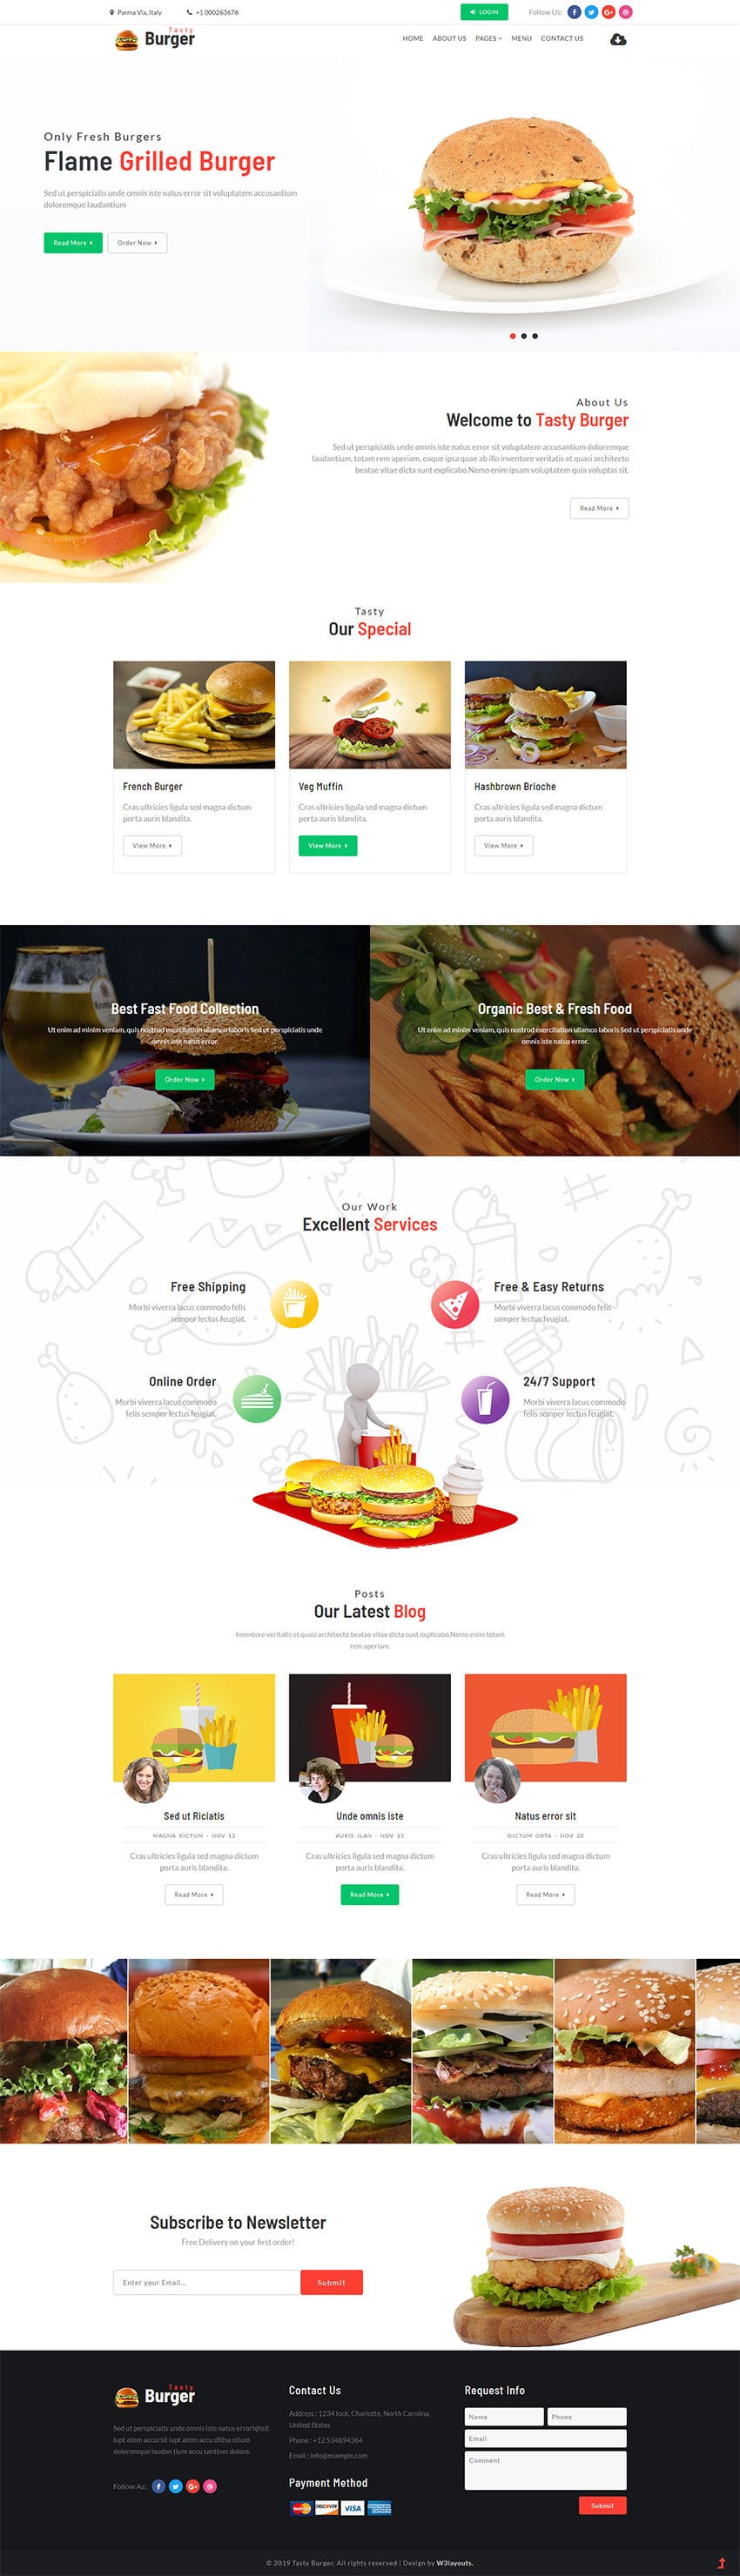 Tasty Burger is a website template built on Bootstrap using HTML suitable for all restaurant and food businesses.